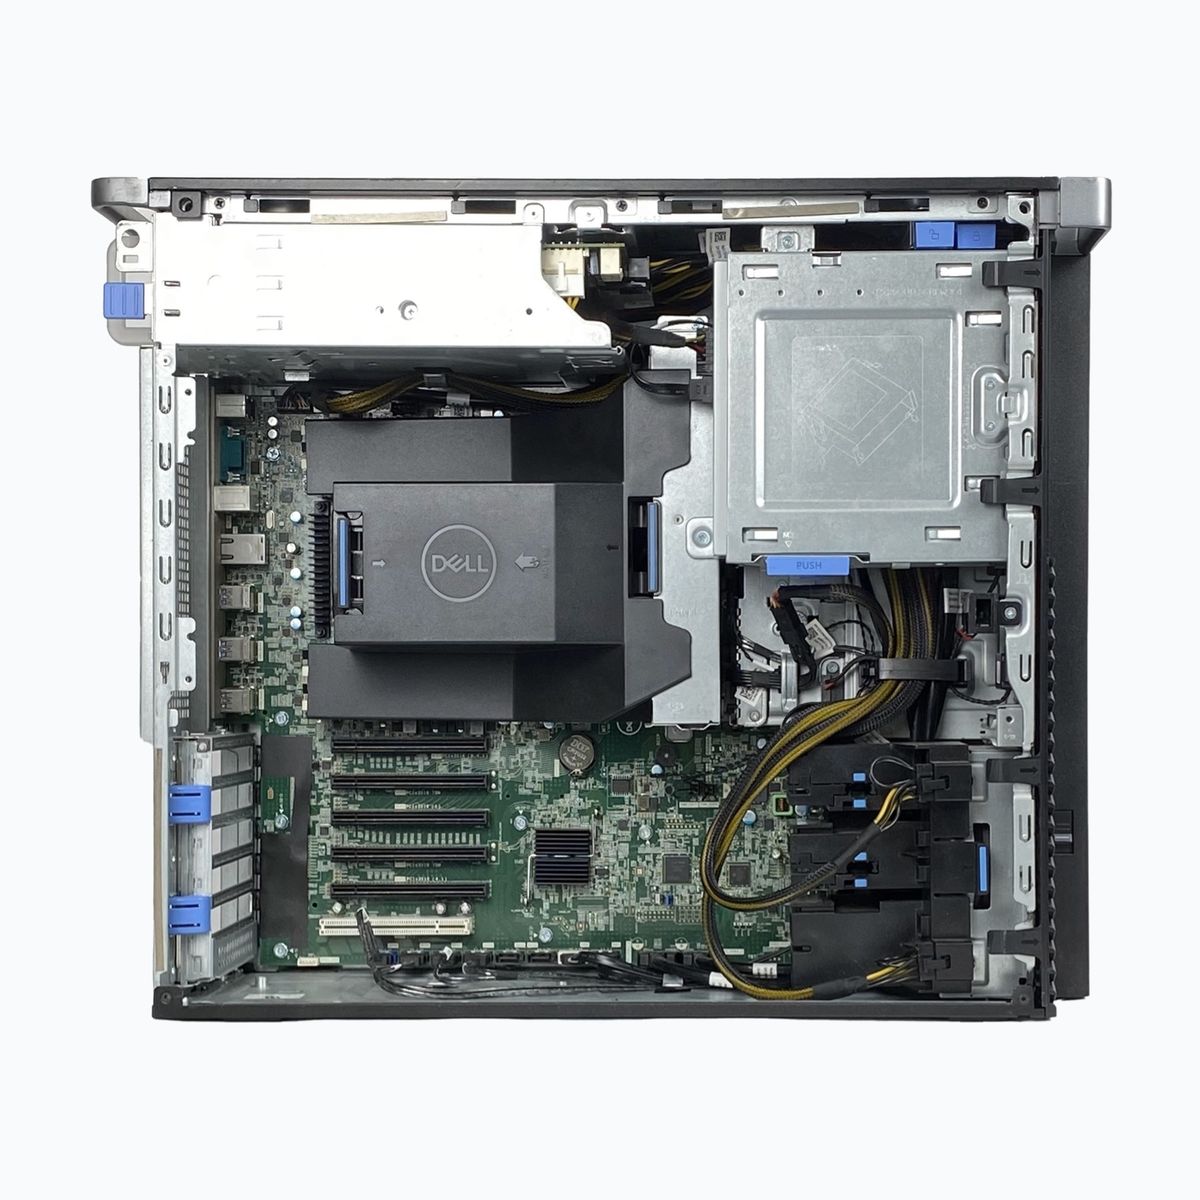 dell-precision-t5820-workstation-950w--mat-trong-1.jpg